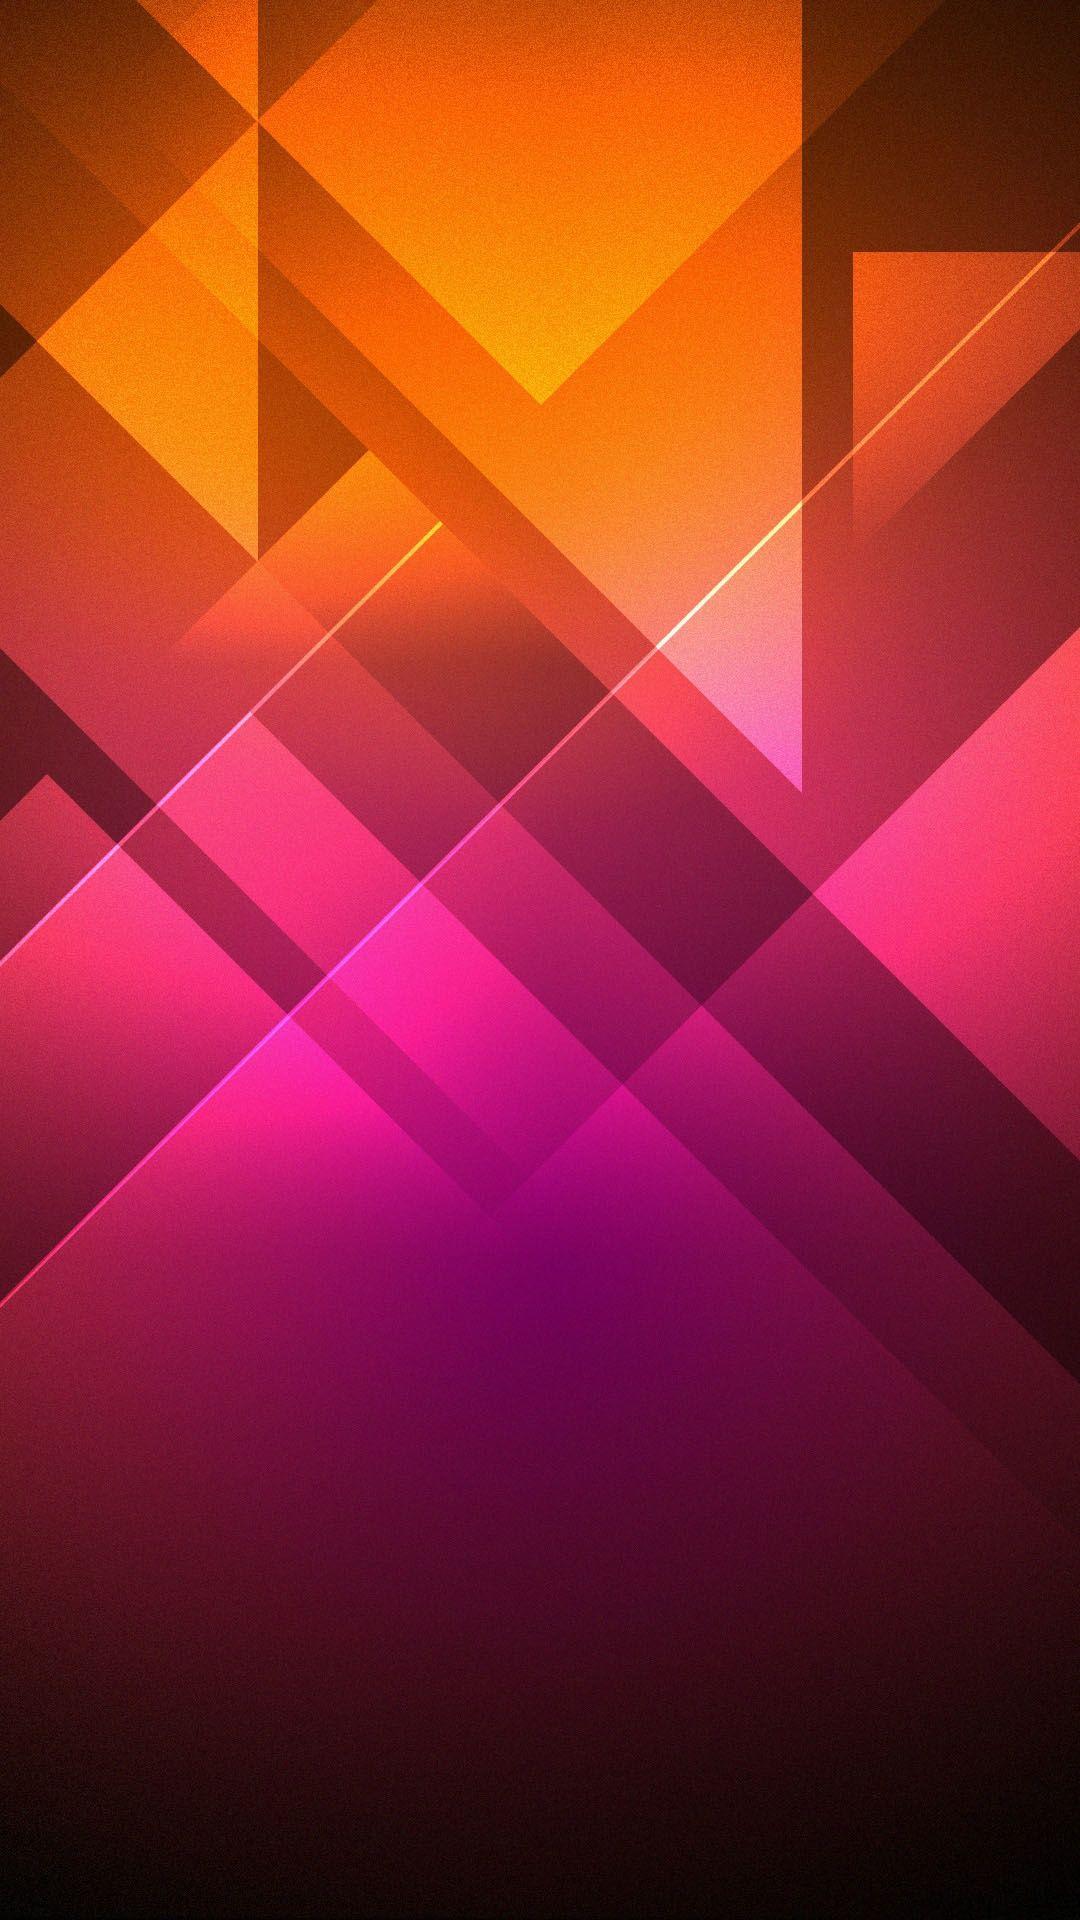 Abstract Pink Orange Triangles Android Wallpaper free download